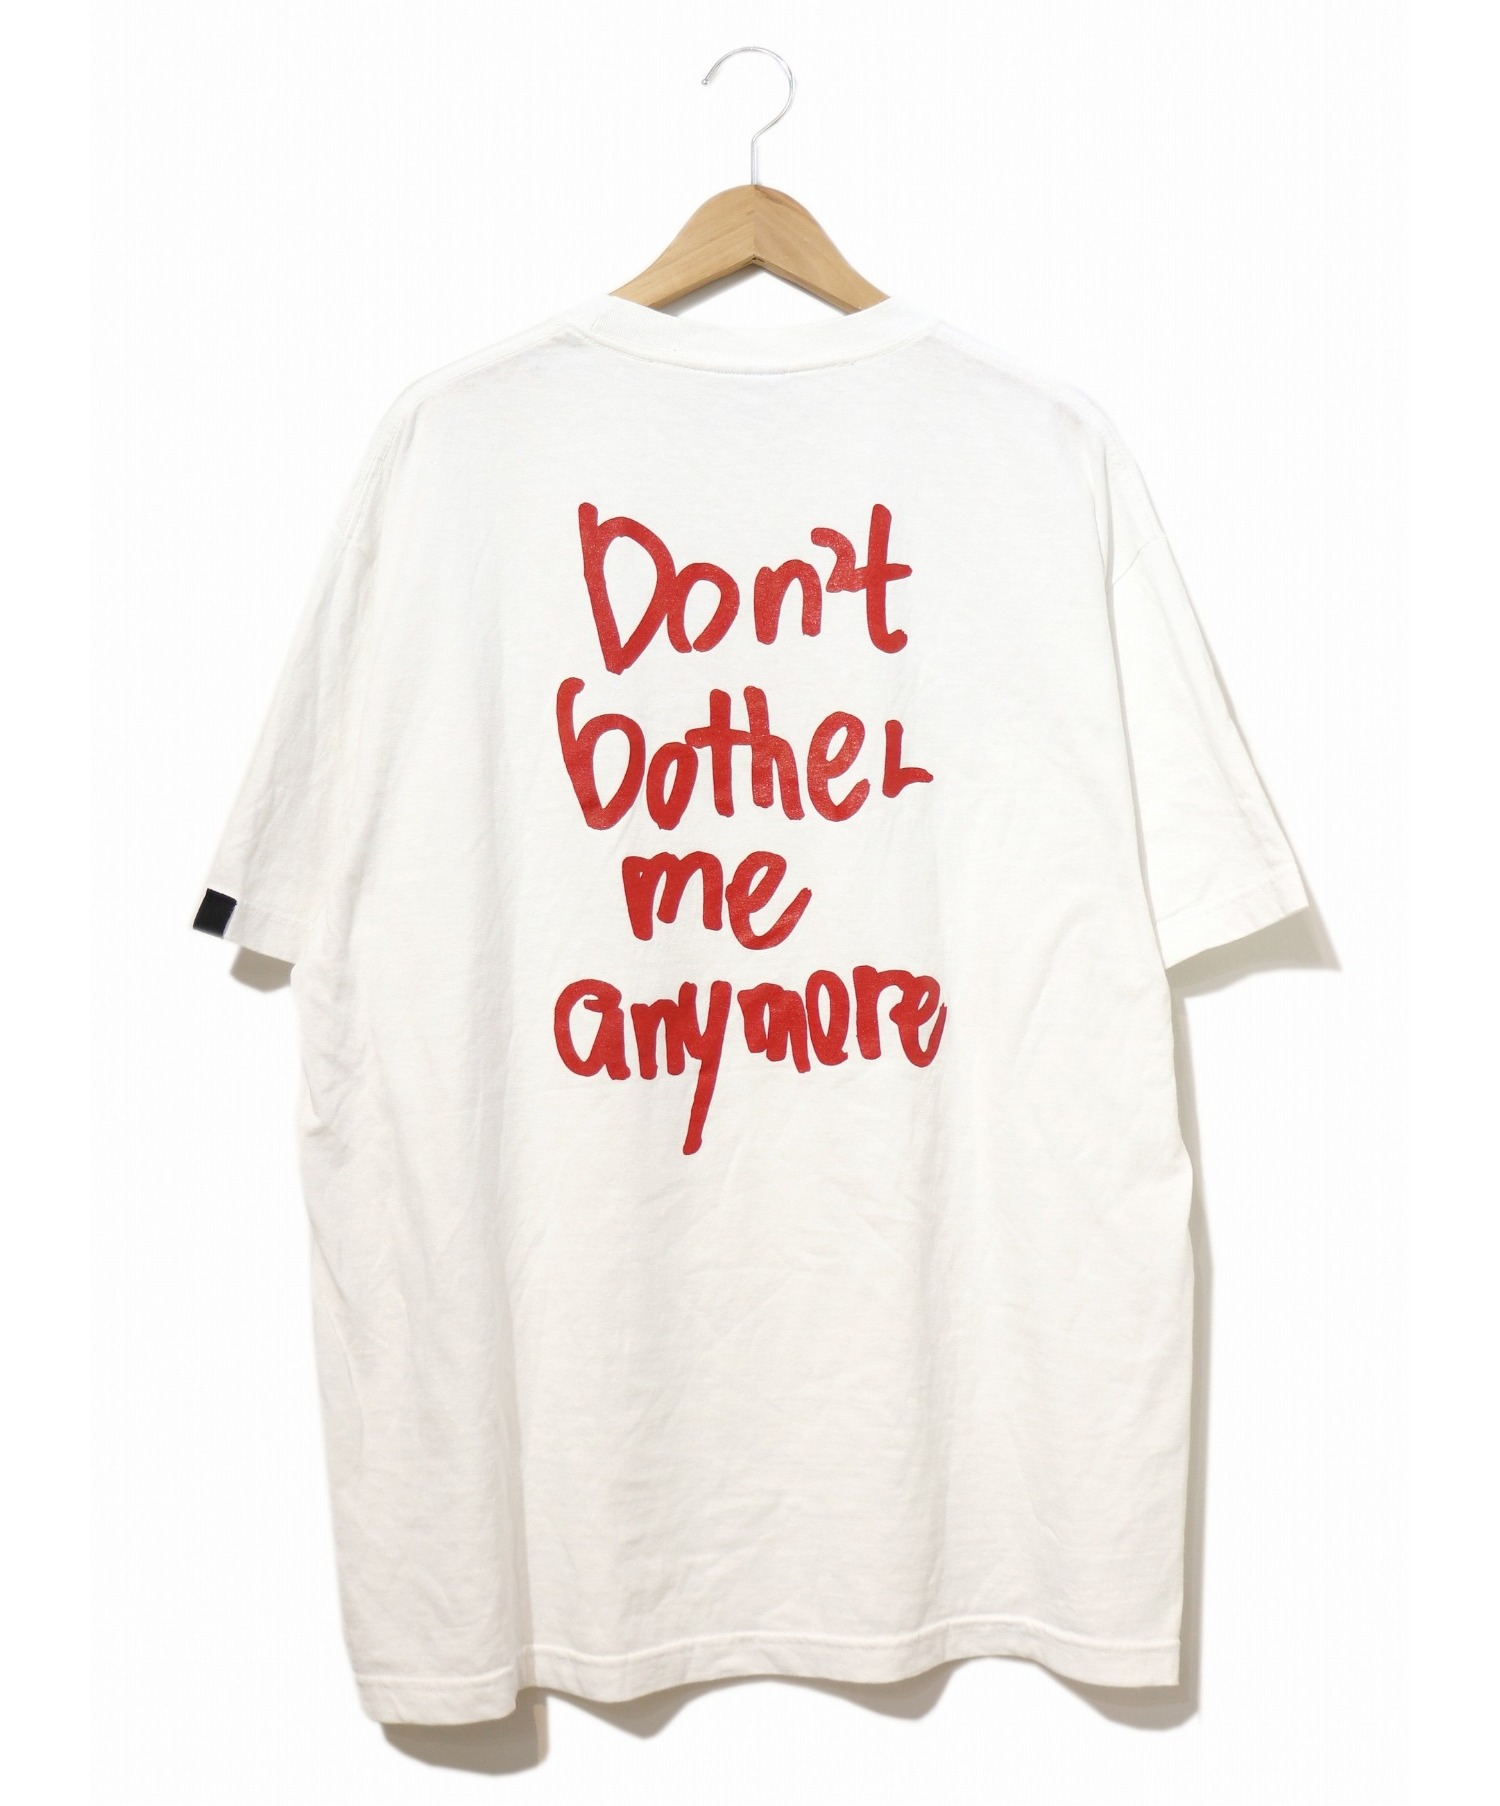 Wasted Youth Don't bother me anymore Teeメンズ